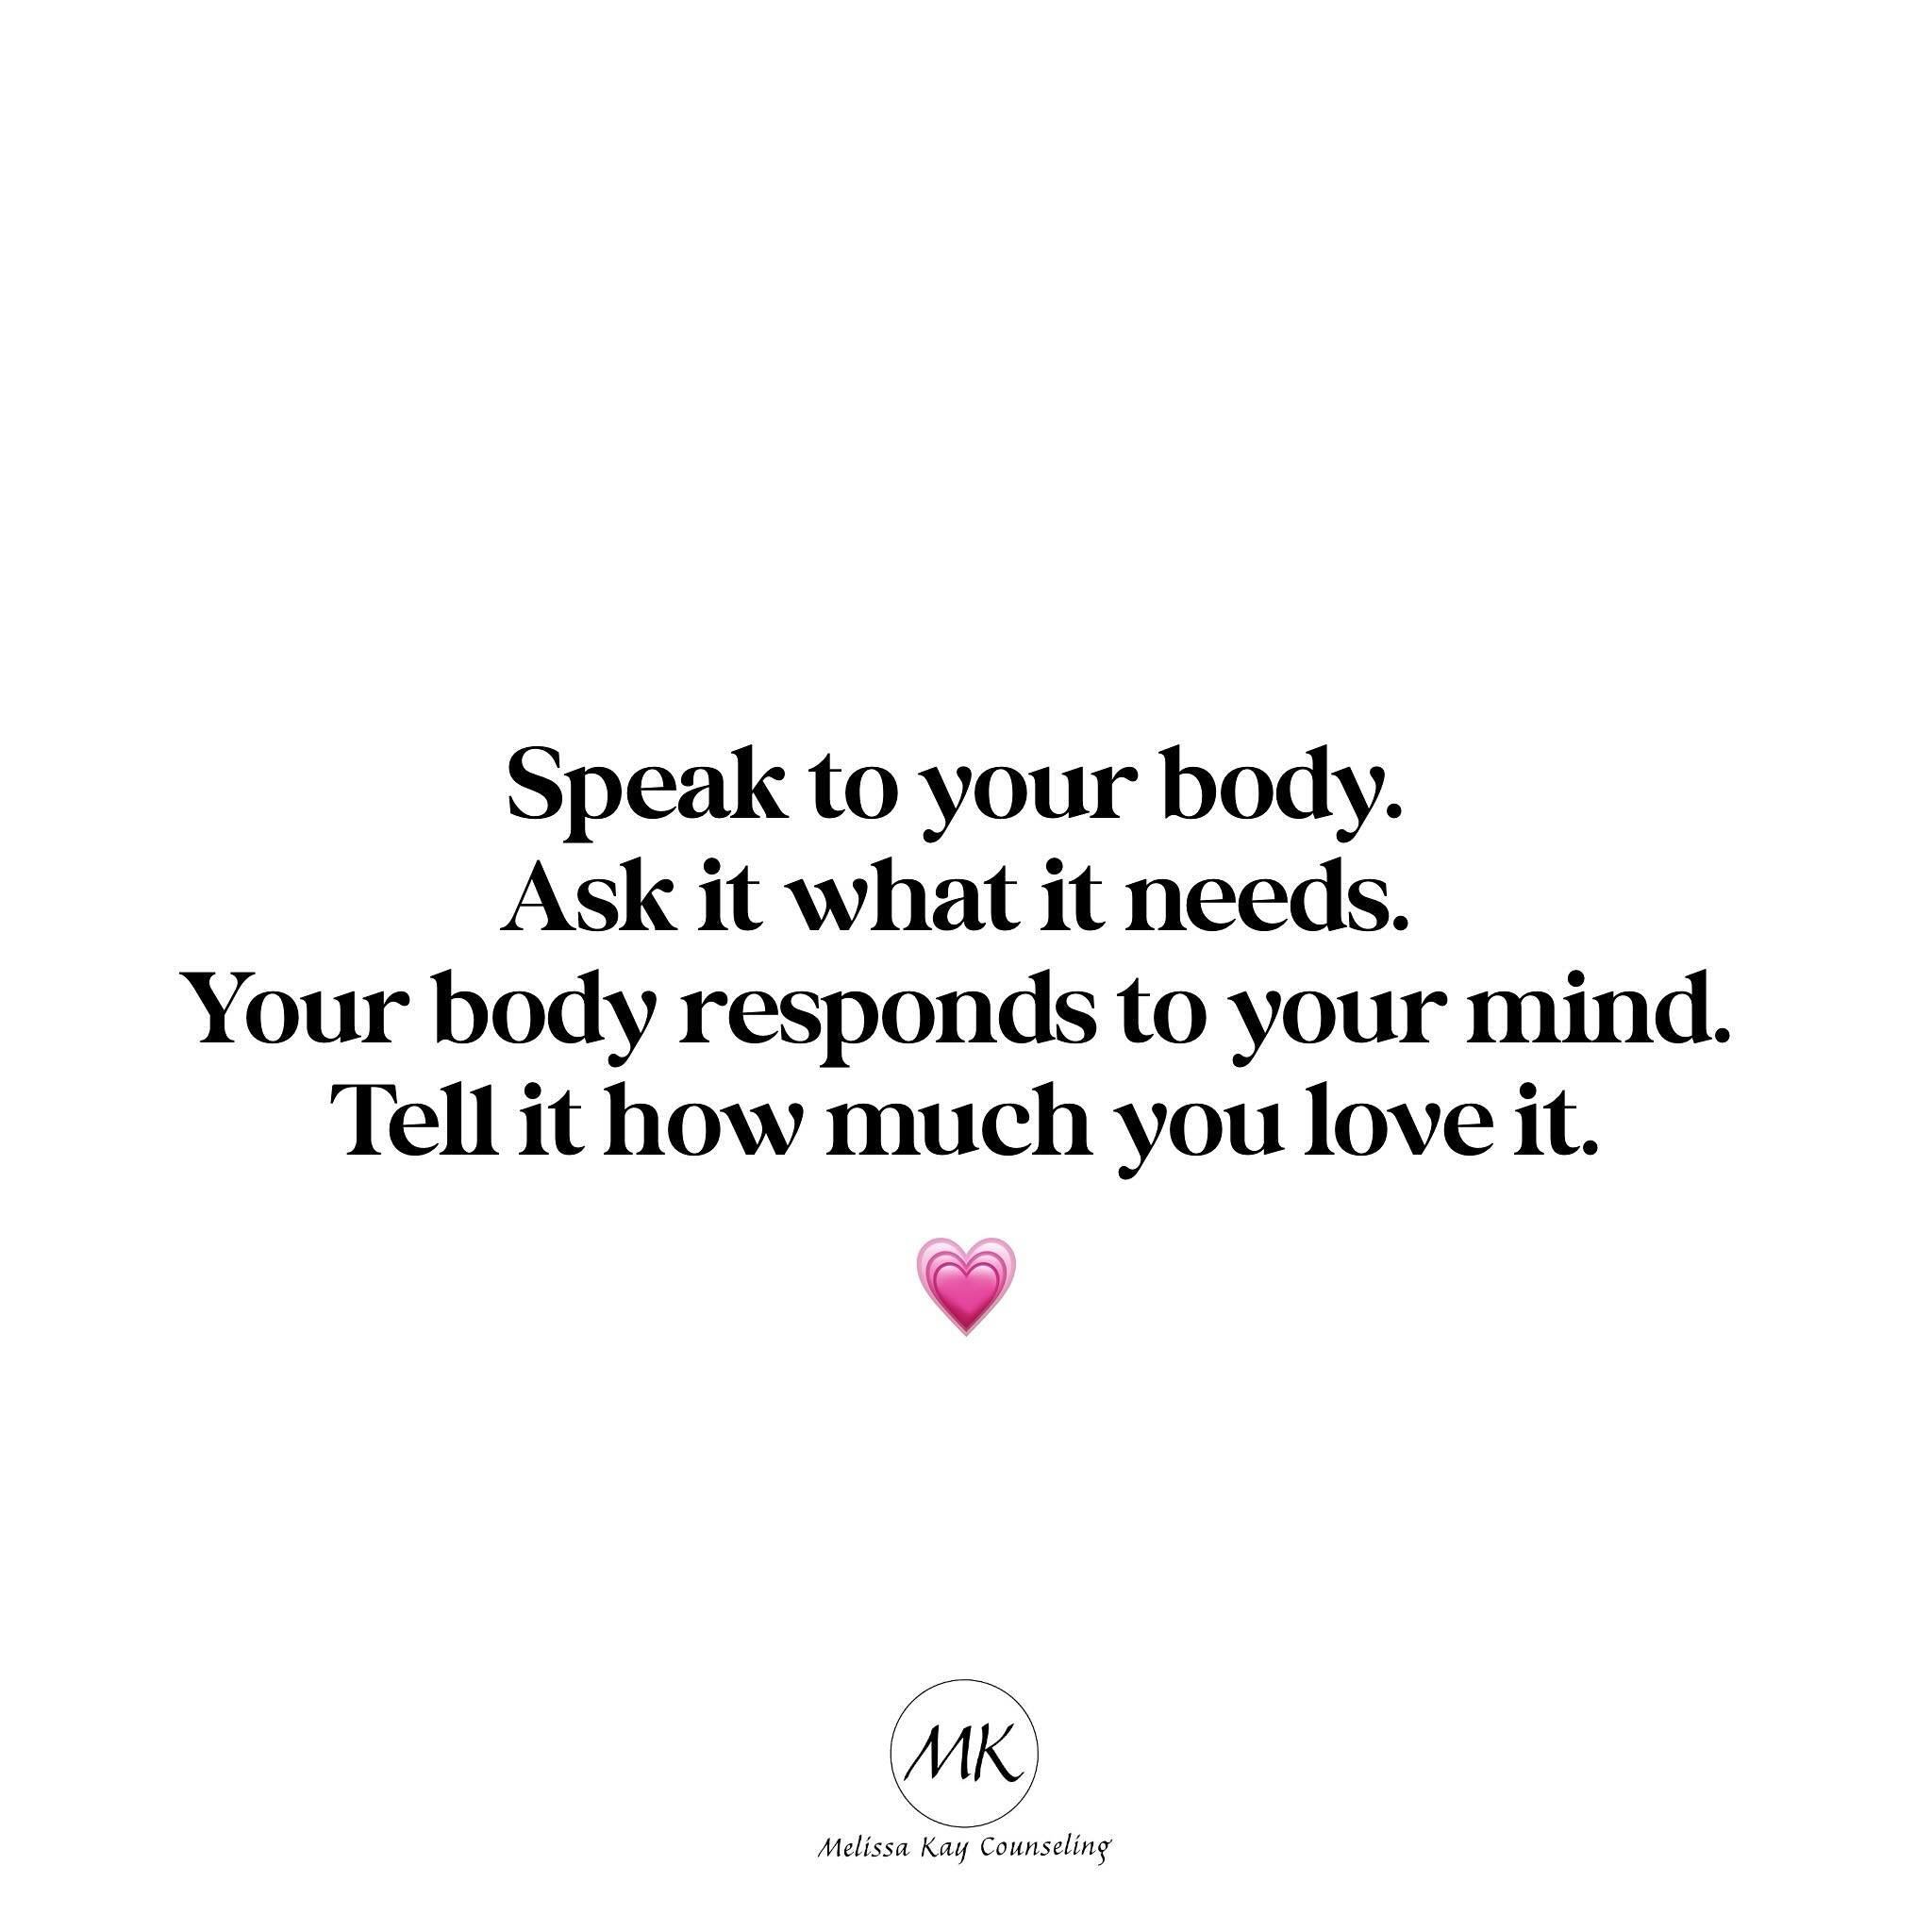 Since I started talking to my body each day and telling it how much I love it, I&rsquo;ve noticed a change in my body. My body has gotten healthier and slimmer. You can give appreciation to your whole body from your feet to your head and all the cell